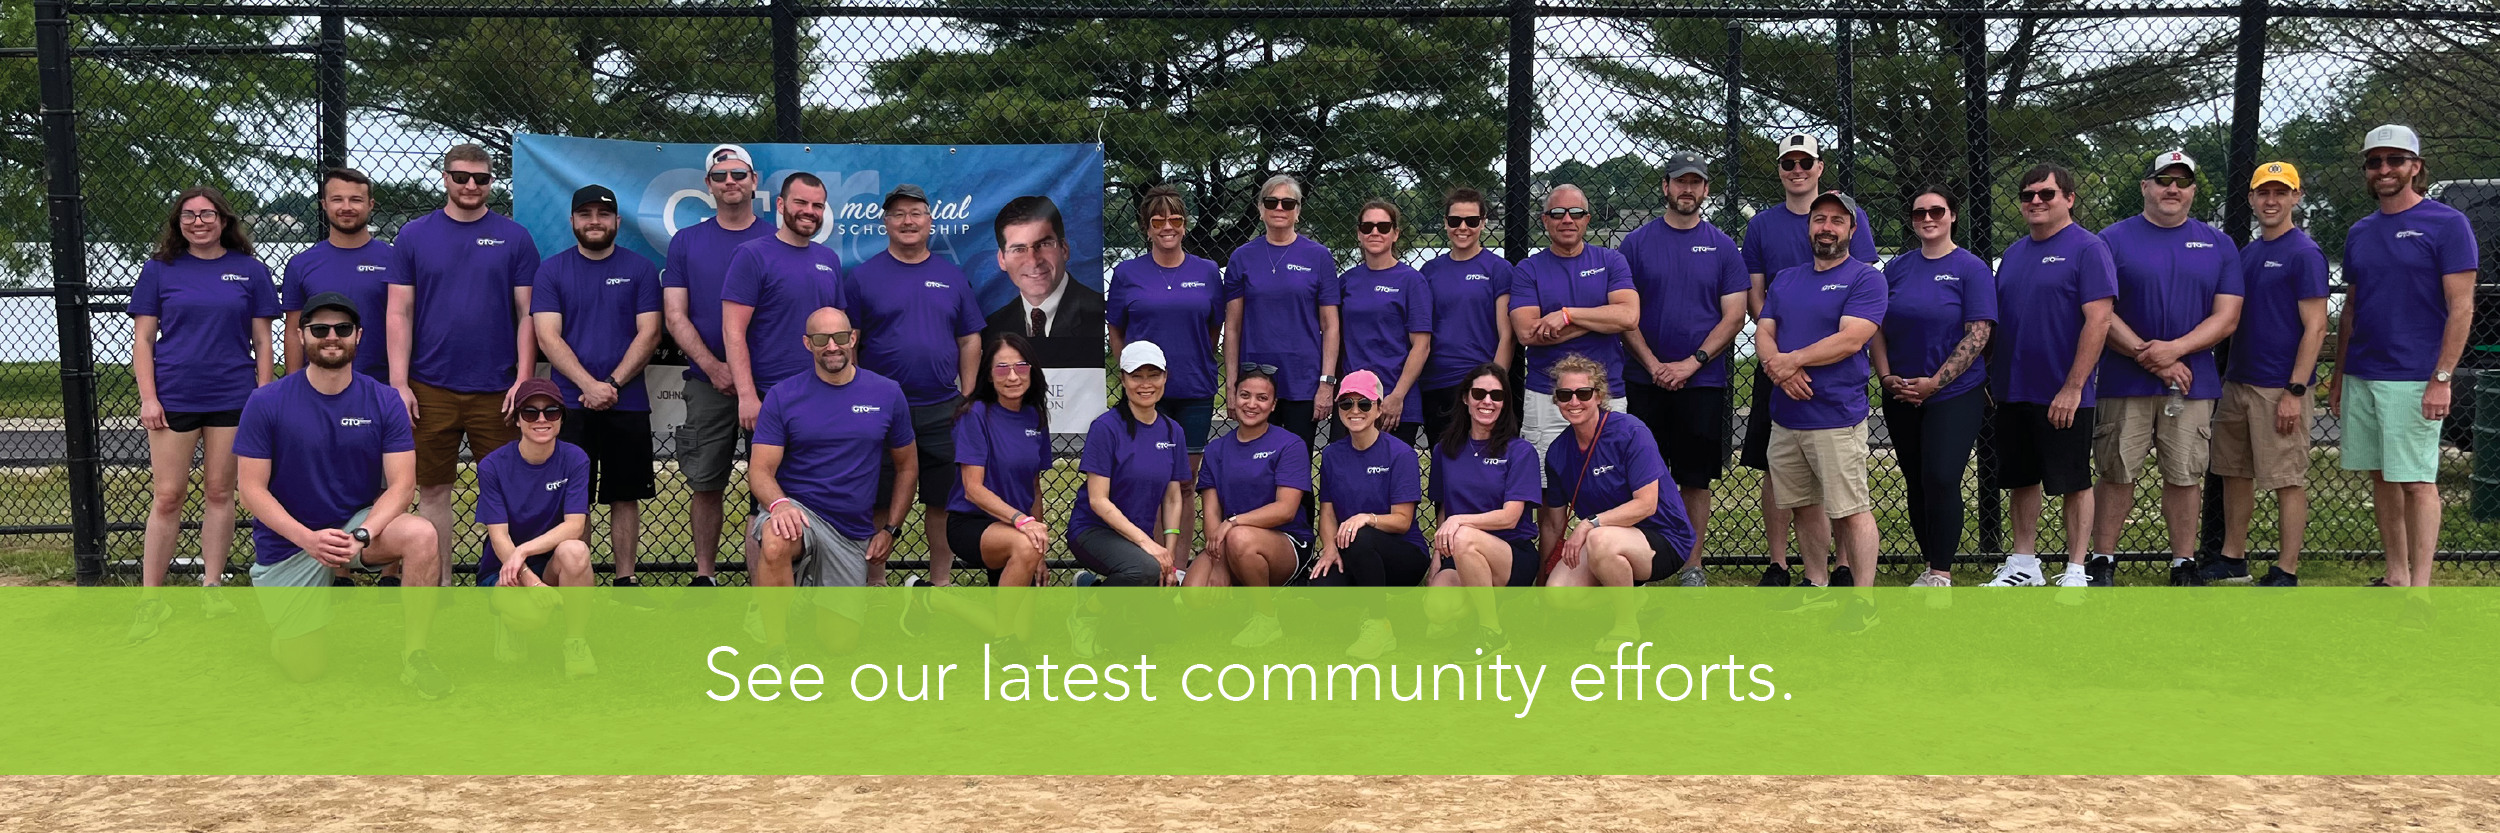 Team photo with caption: See Our Latest Community Efforts